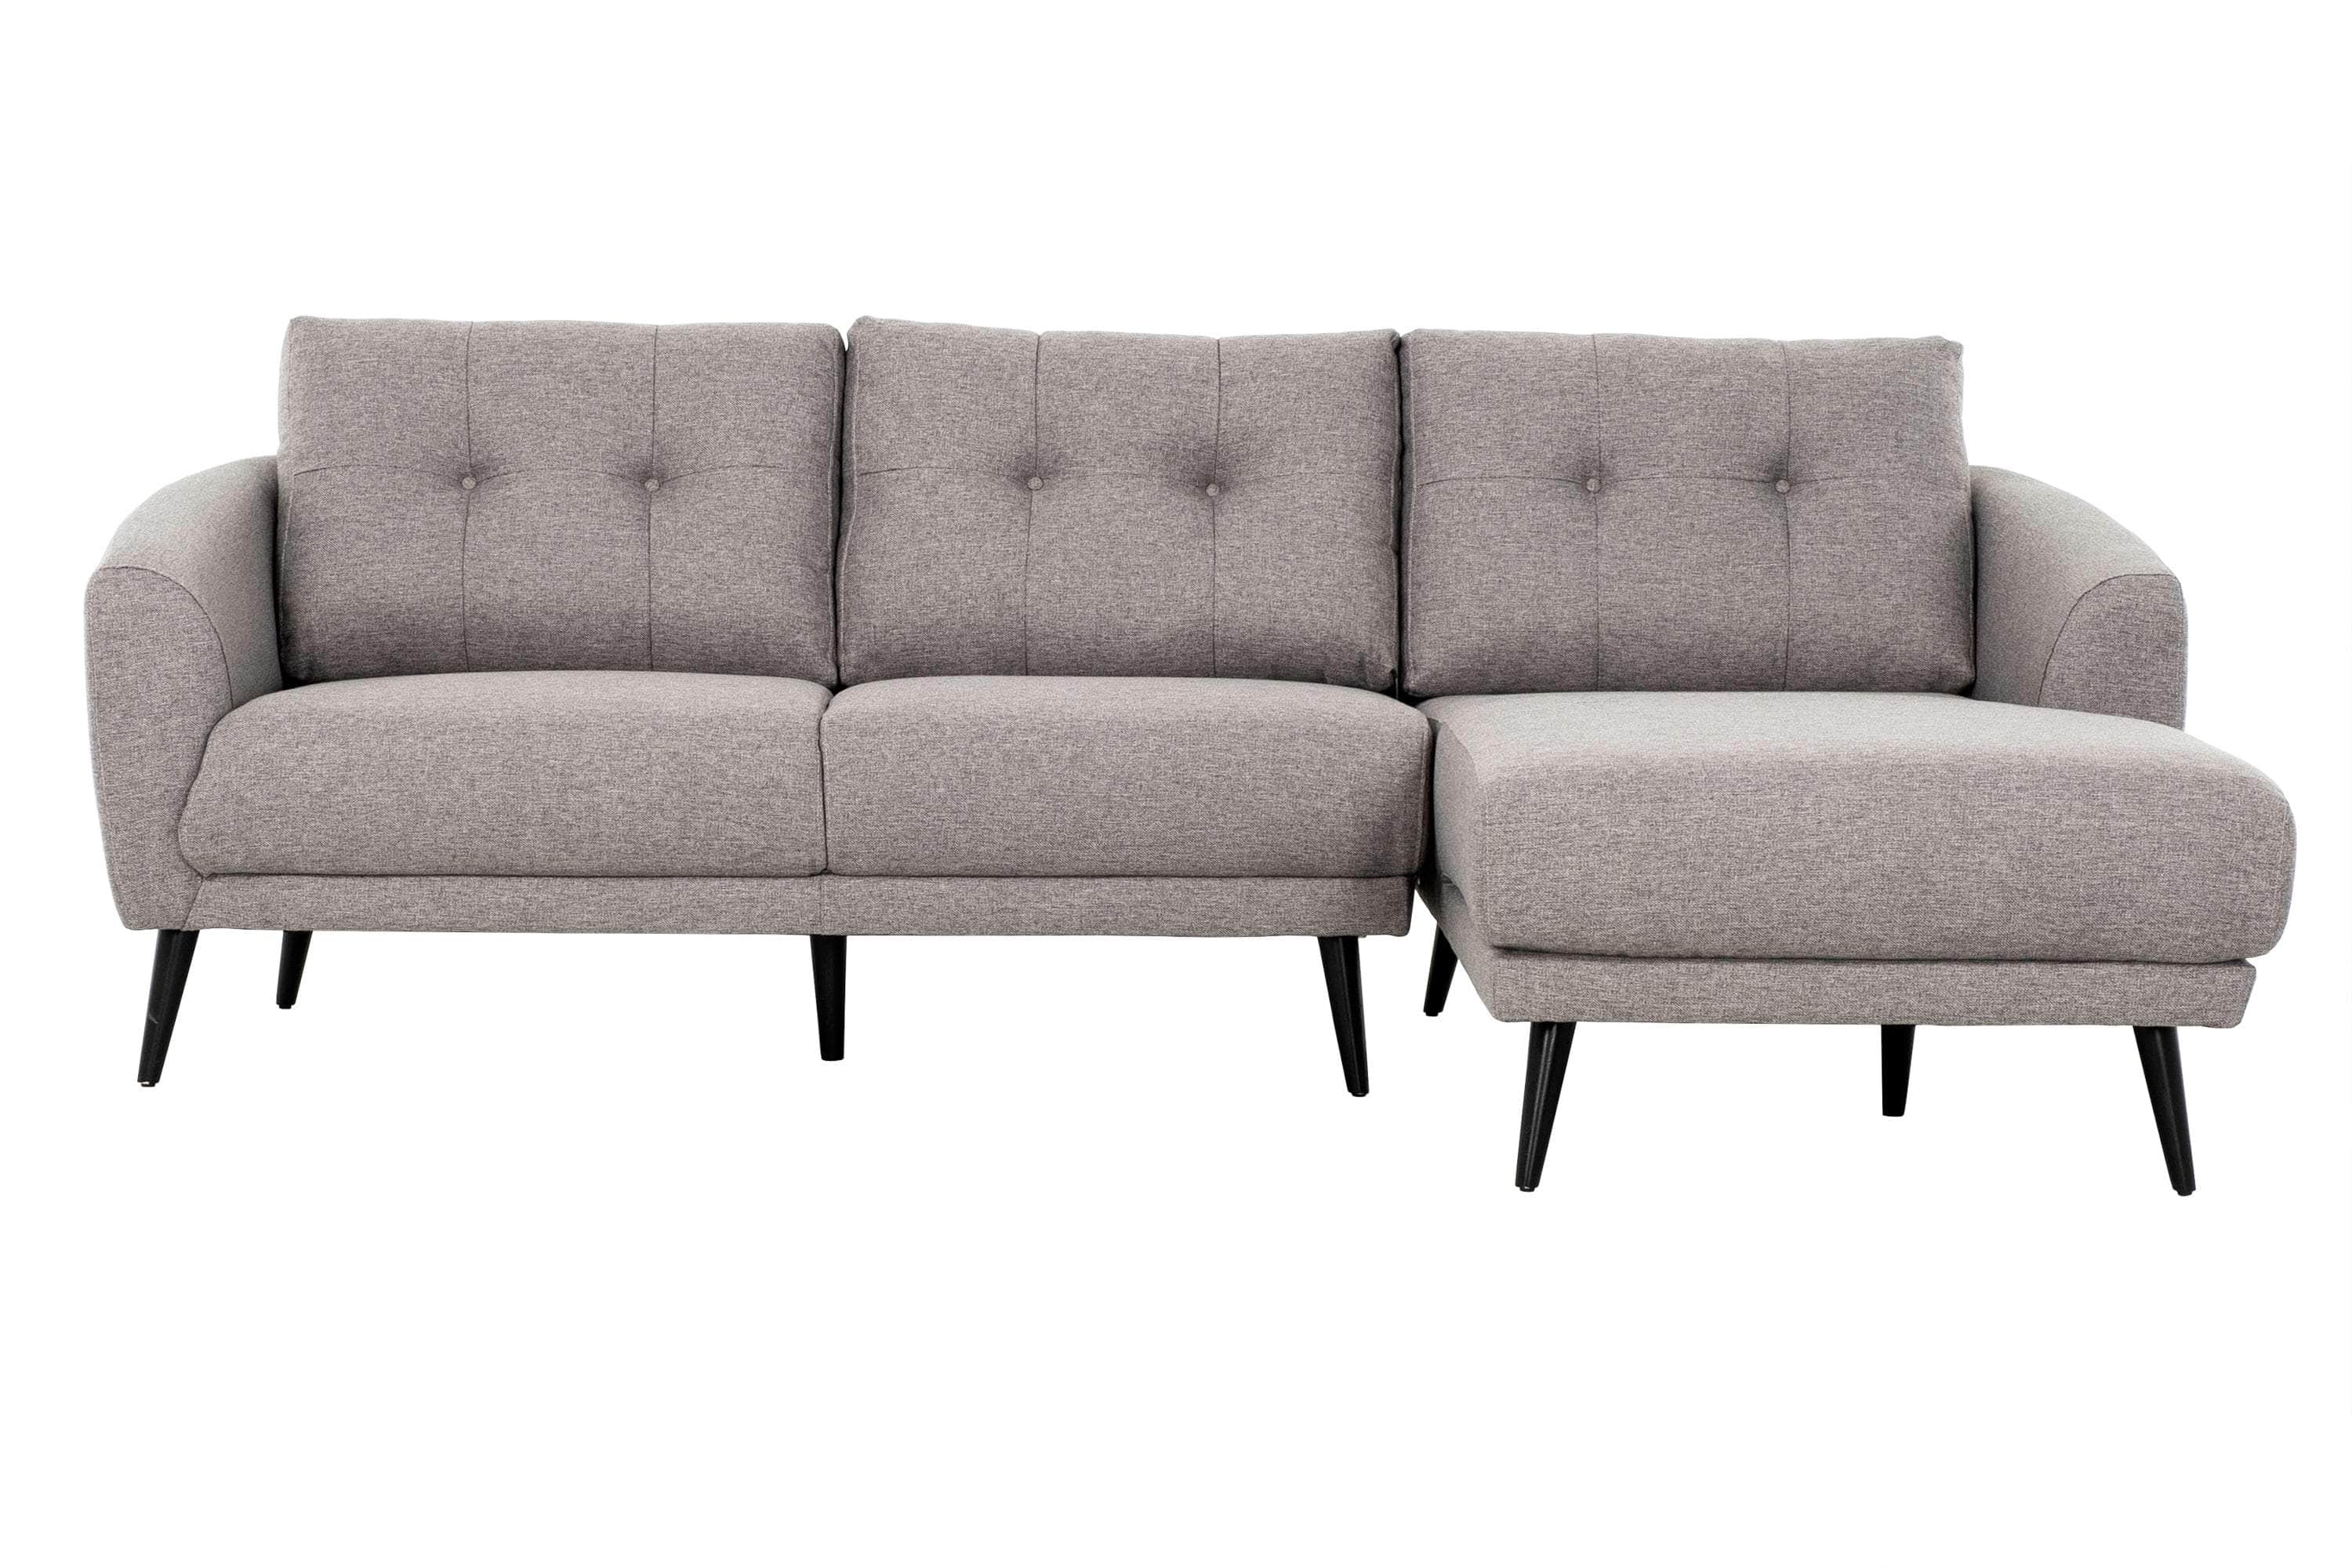 True Contemporary Sectional Right Facing Chaise Elizabeth Tufted Sectional Sofa in Nia Grey